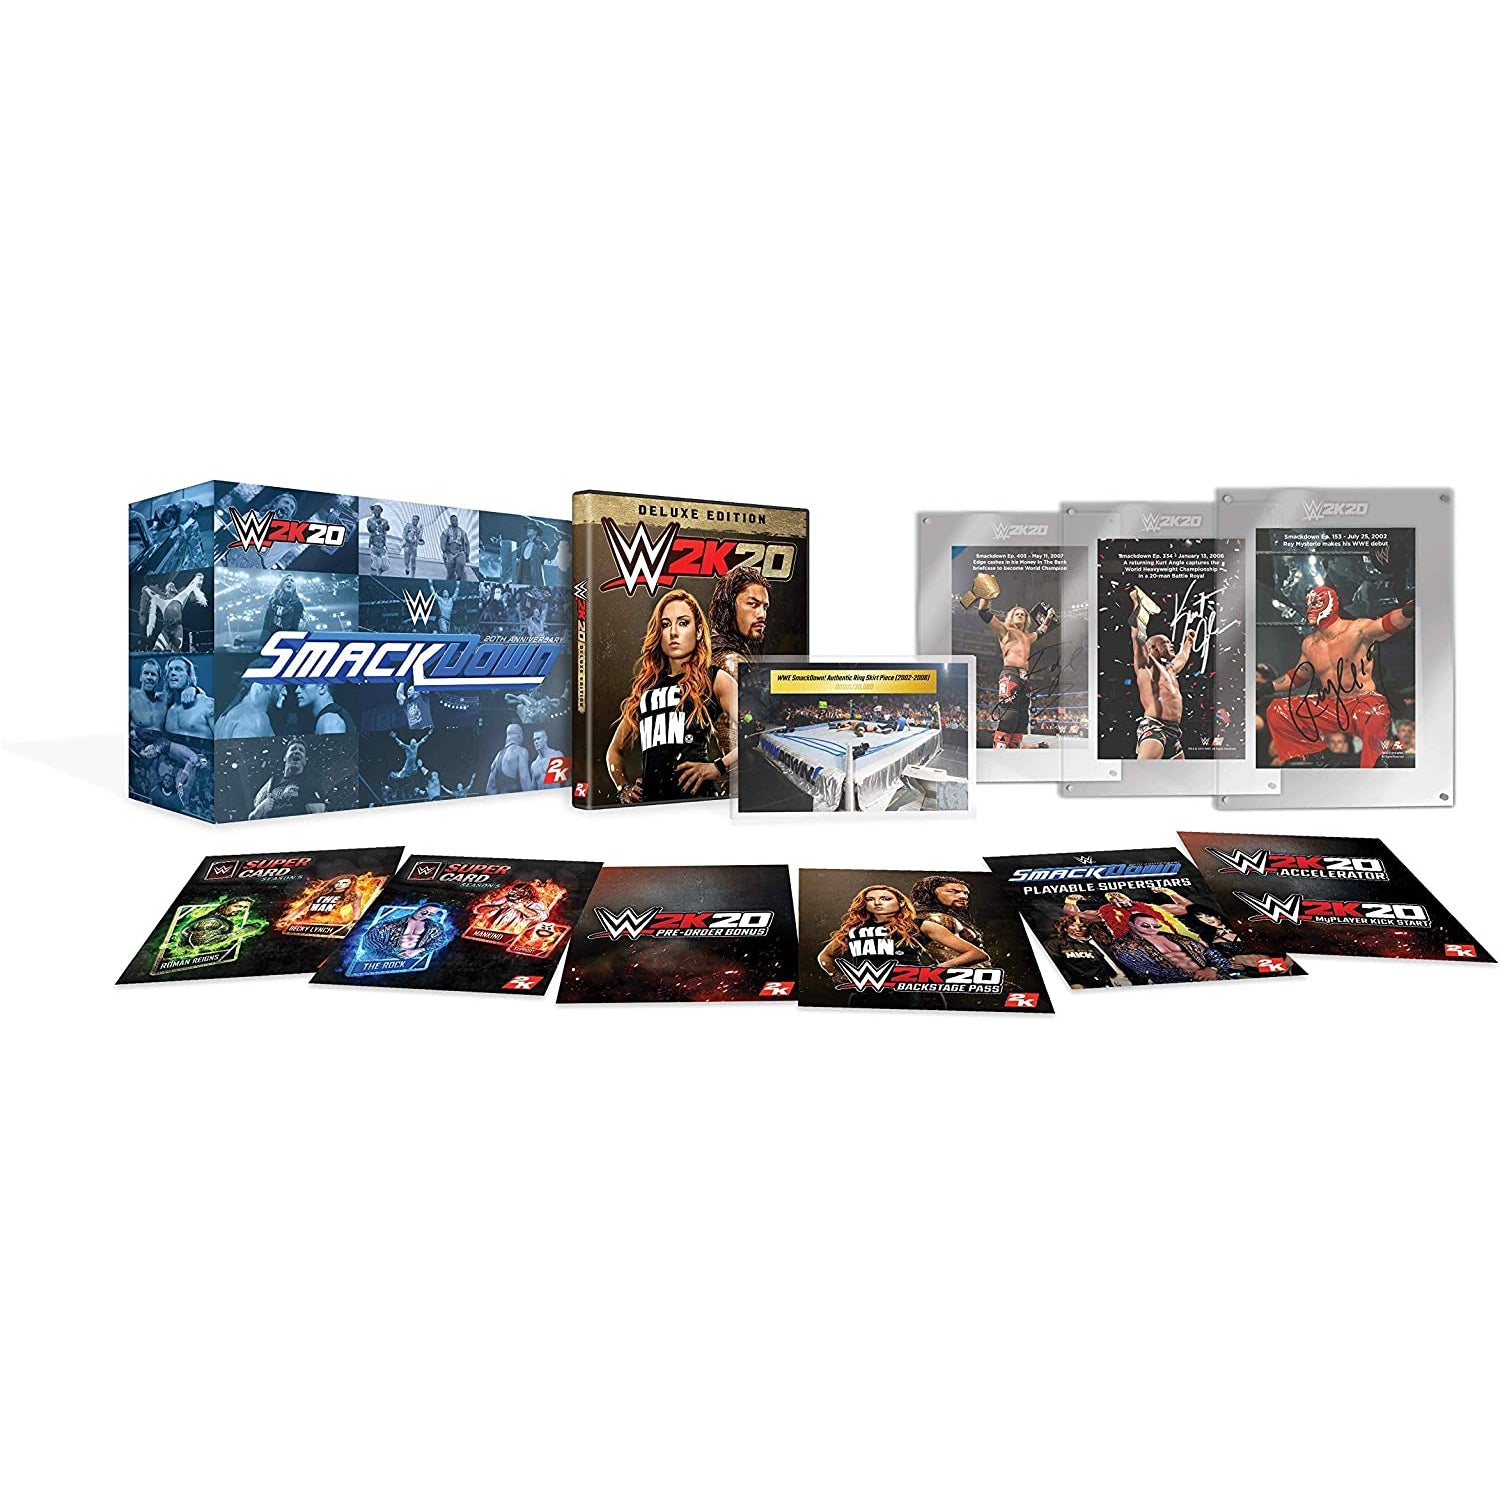 WWE 2K20 Smackdown 20th Anniversary Edition (PS4)